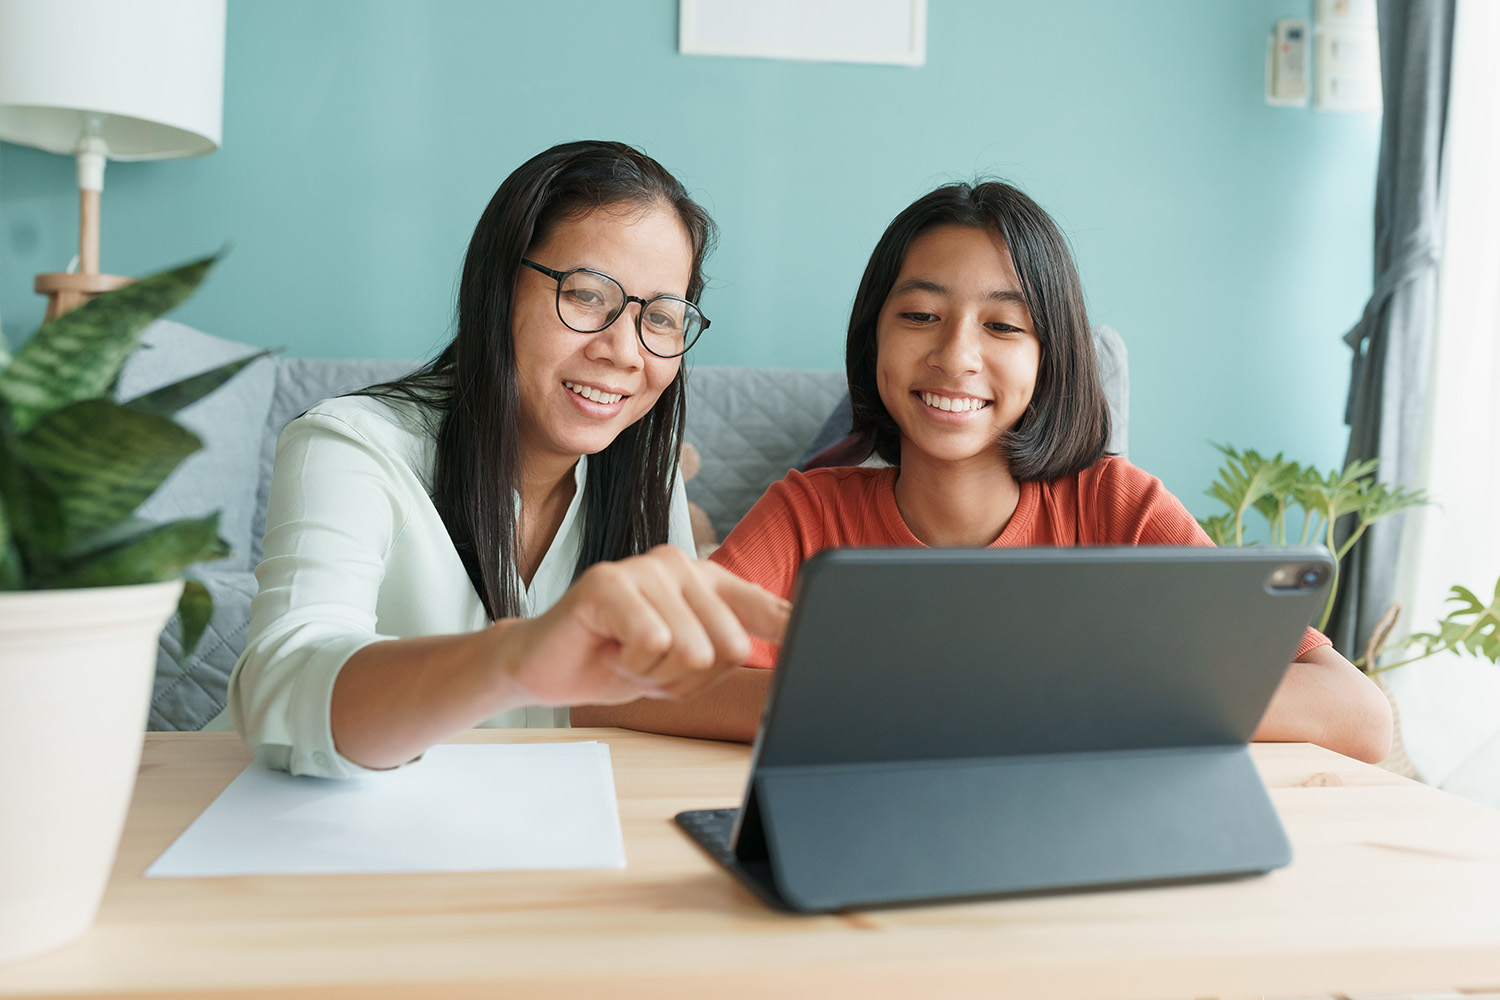 Mom and daughter logging into online therapy session together